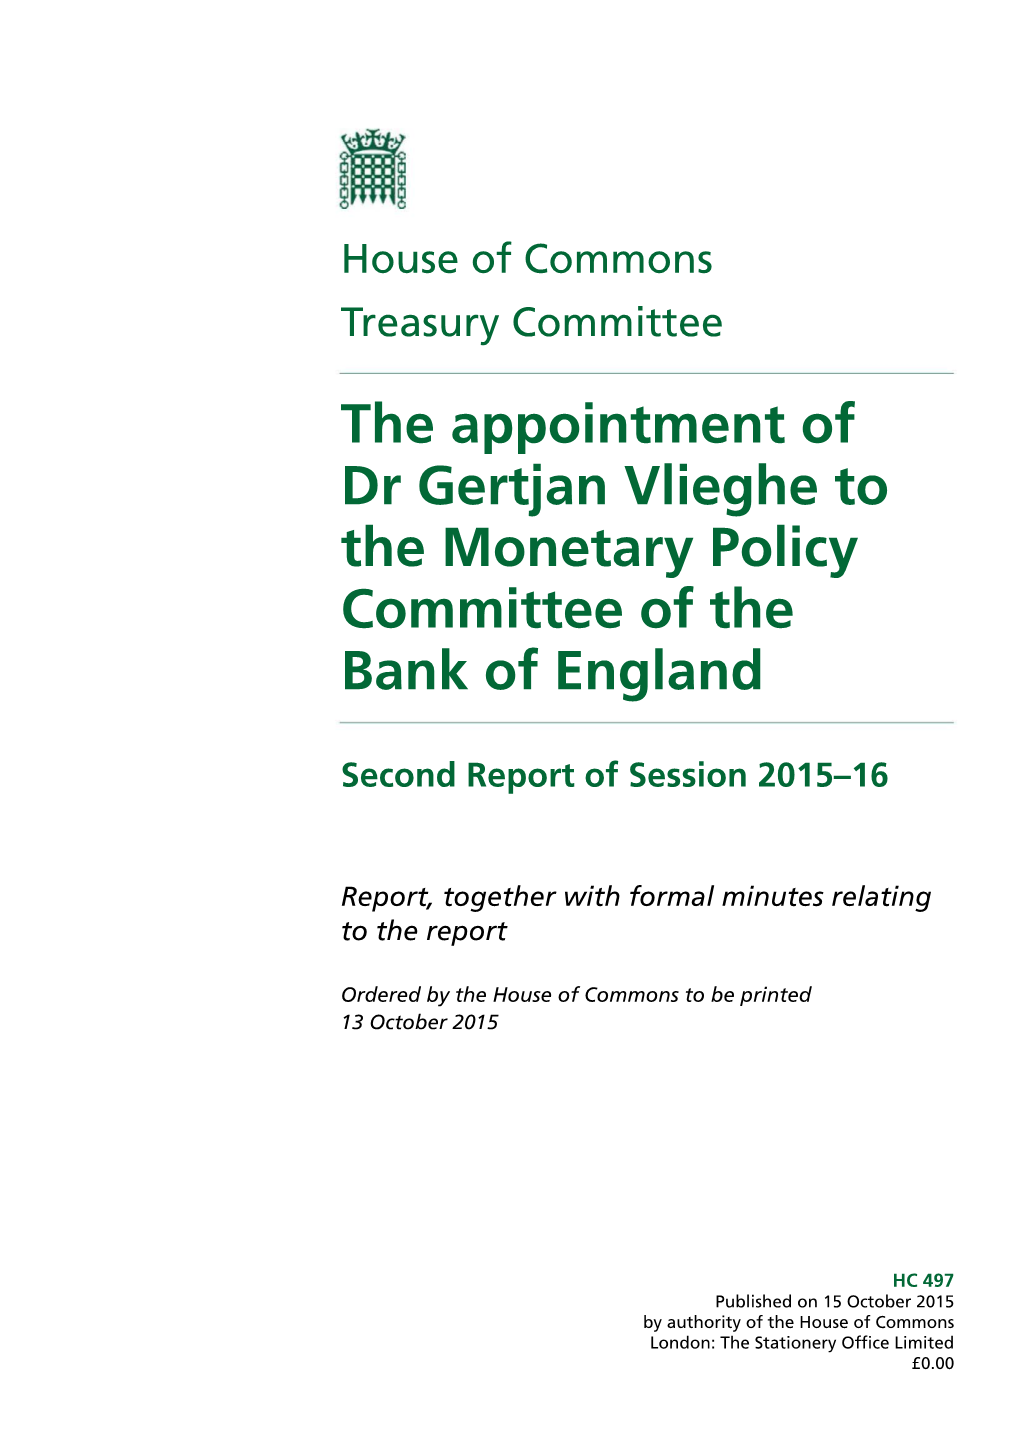 Appointment of Gertjan Vlieghe to the Monetary Policy Committee of the Bank of England 1